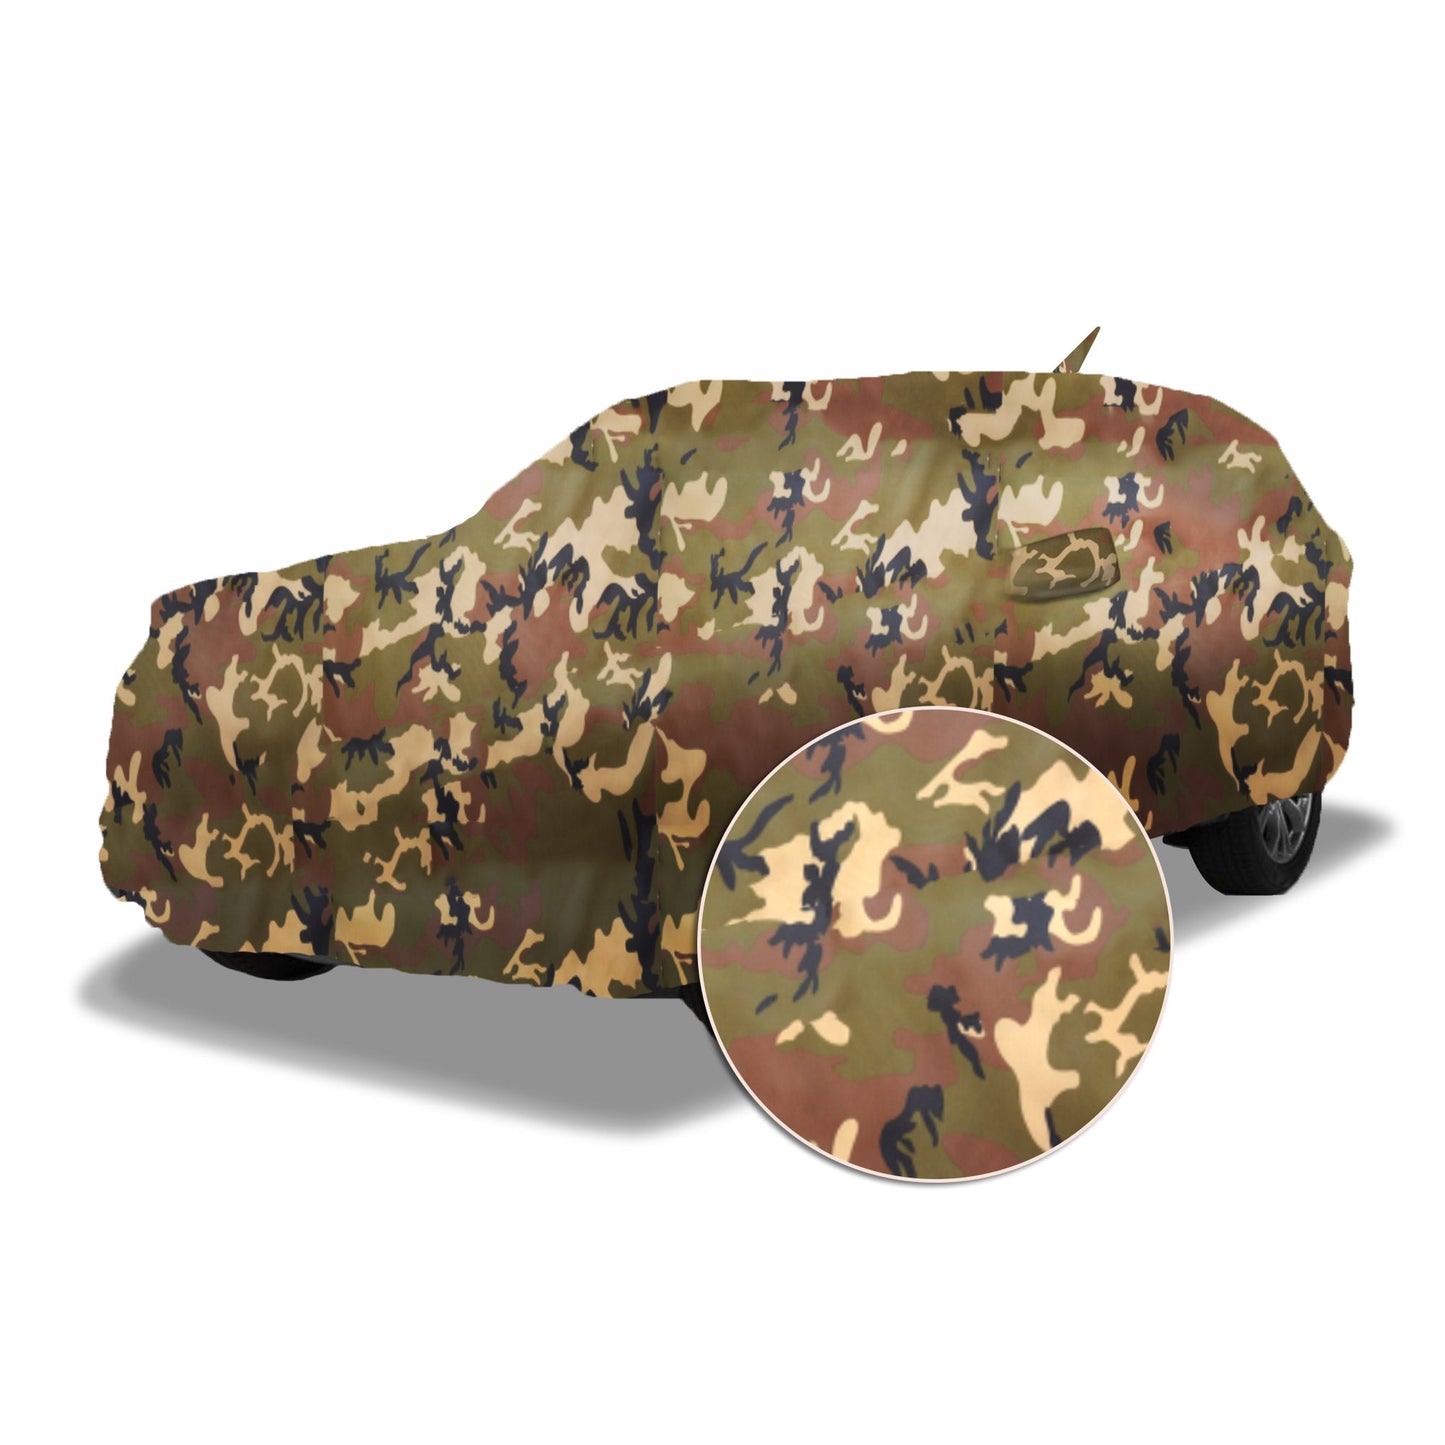 Ascot Audi RSQ8 2019-2023 Model Car Body Cover Extra Strong & Dust Proof Jungle Military Car Cover with UV Proof & Water-Resistant Coating